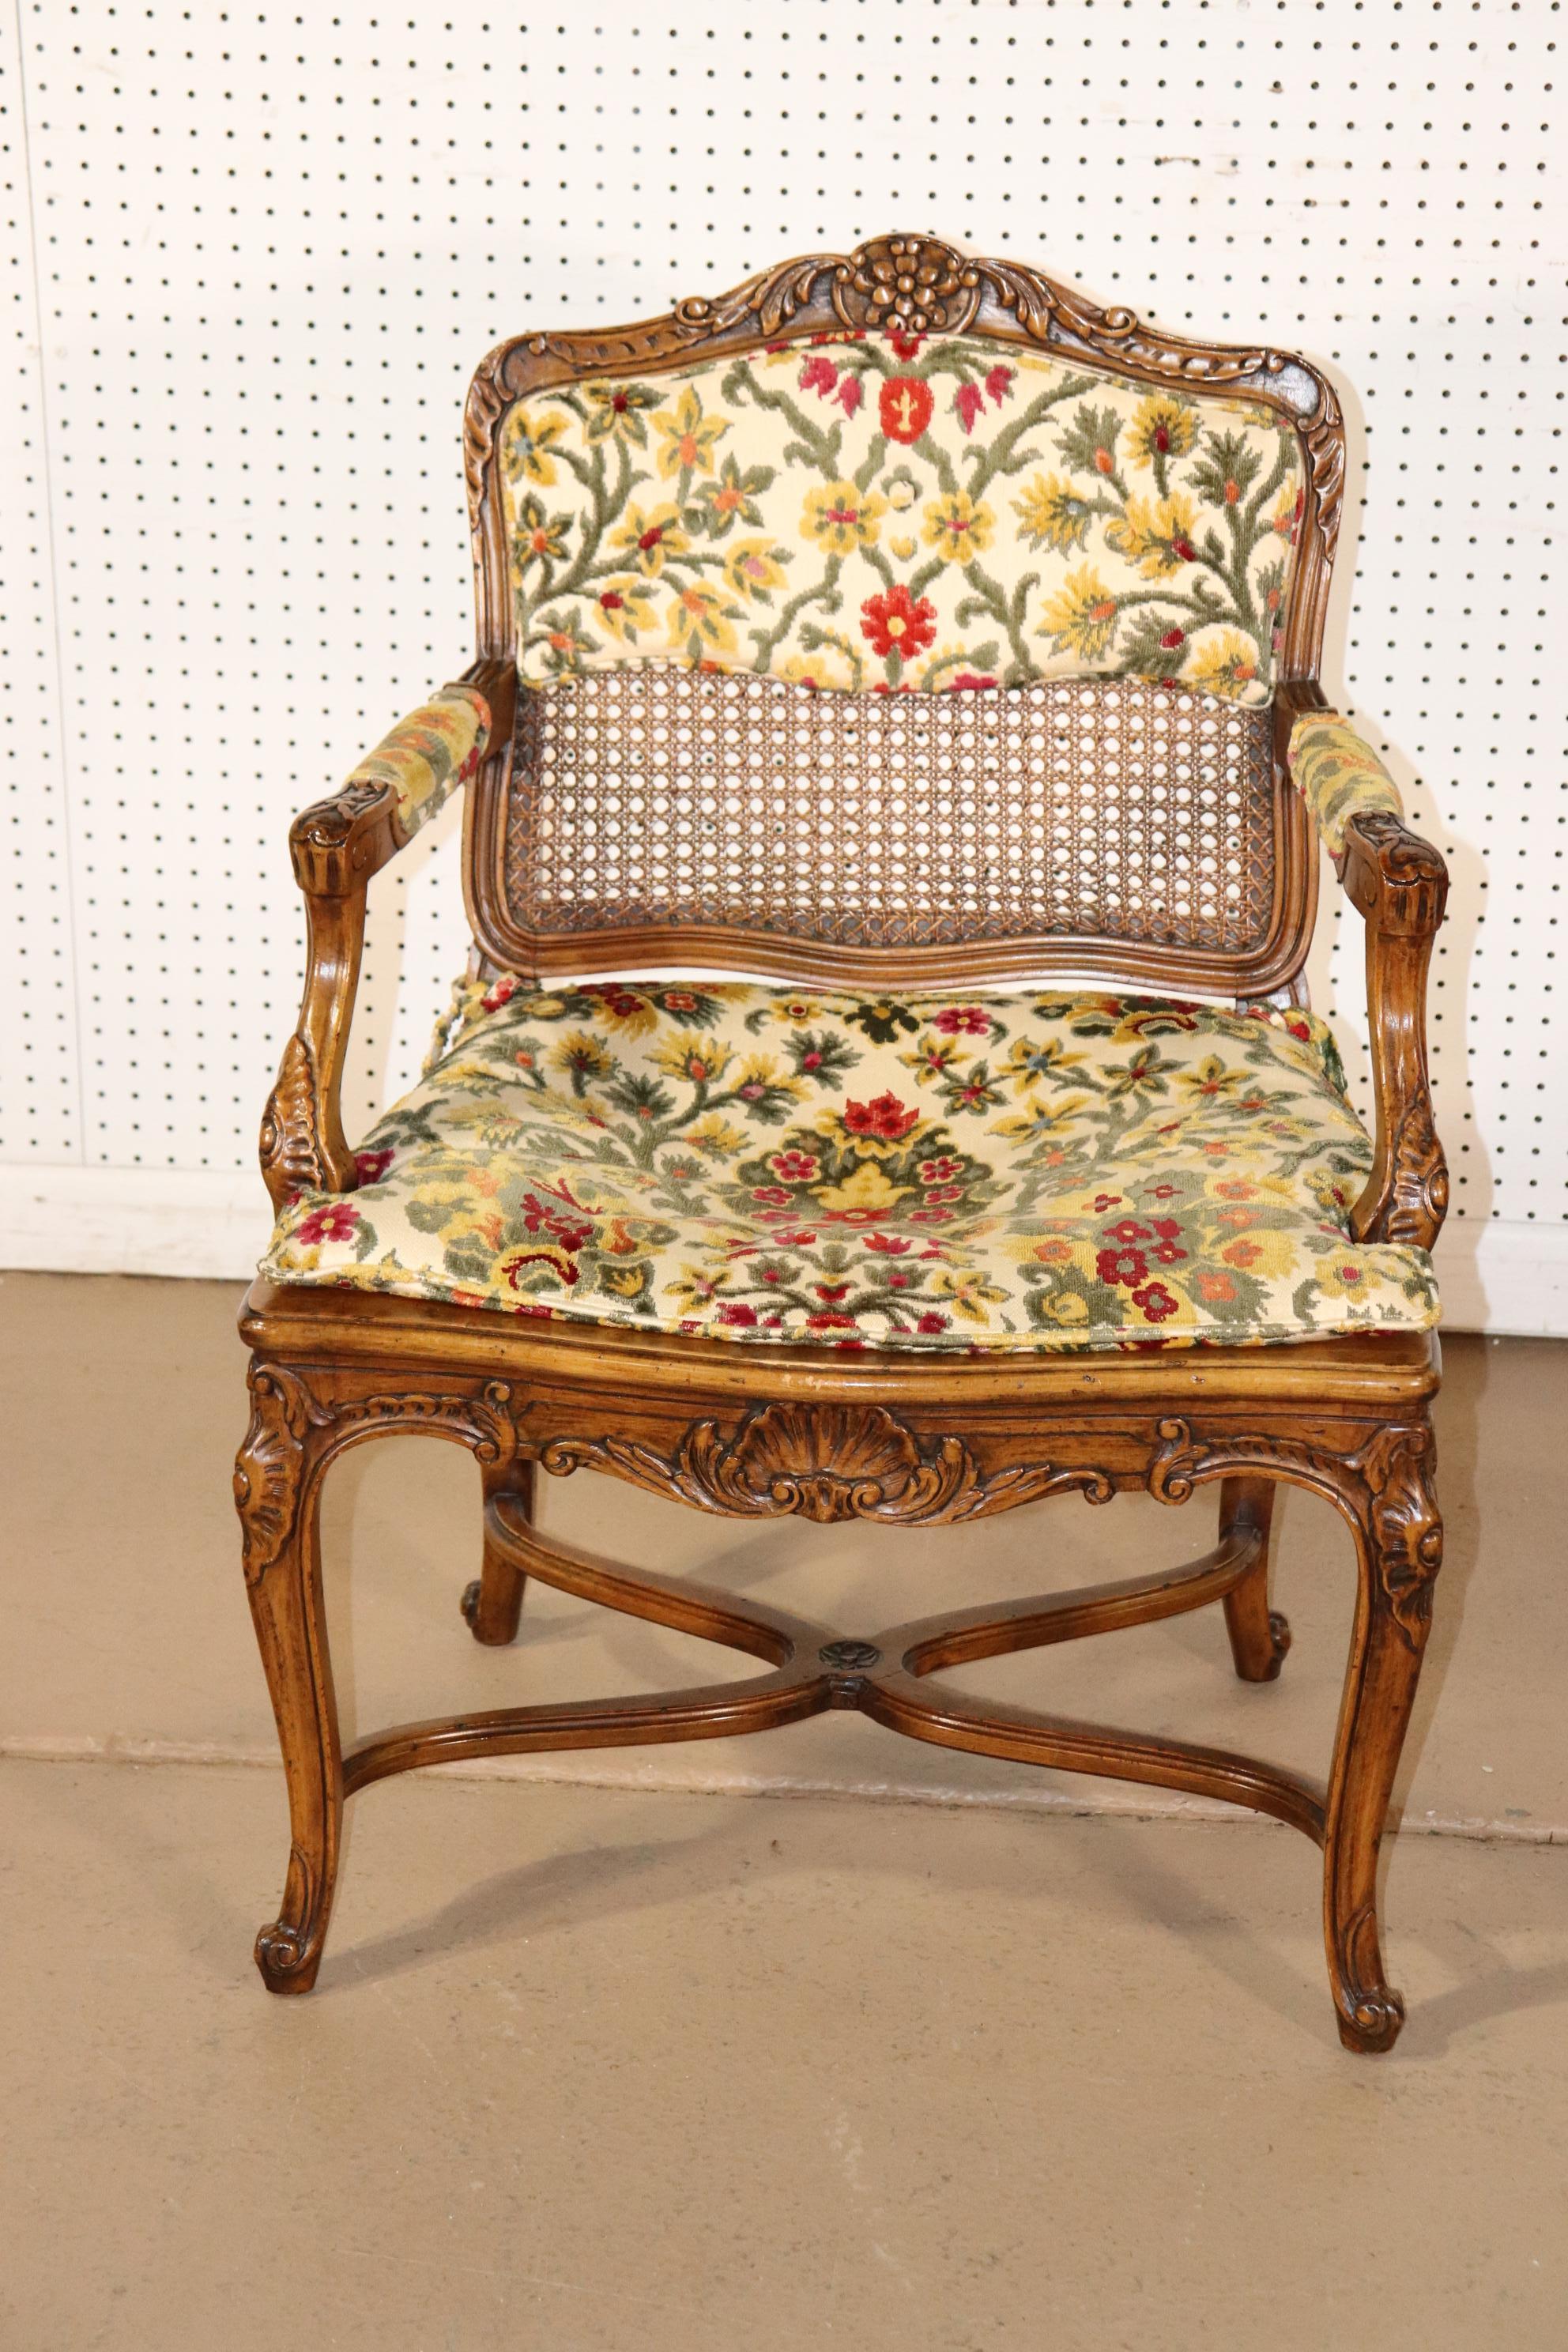 This chair features a cane seat and a cane back. The seat is pushed in and the cushion does work to hide that. But that's the way it is. The dimensions are 36 tall x 25 wide x 20 deep and the seat height is 18 inches with the cushion.